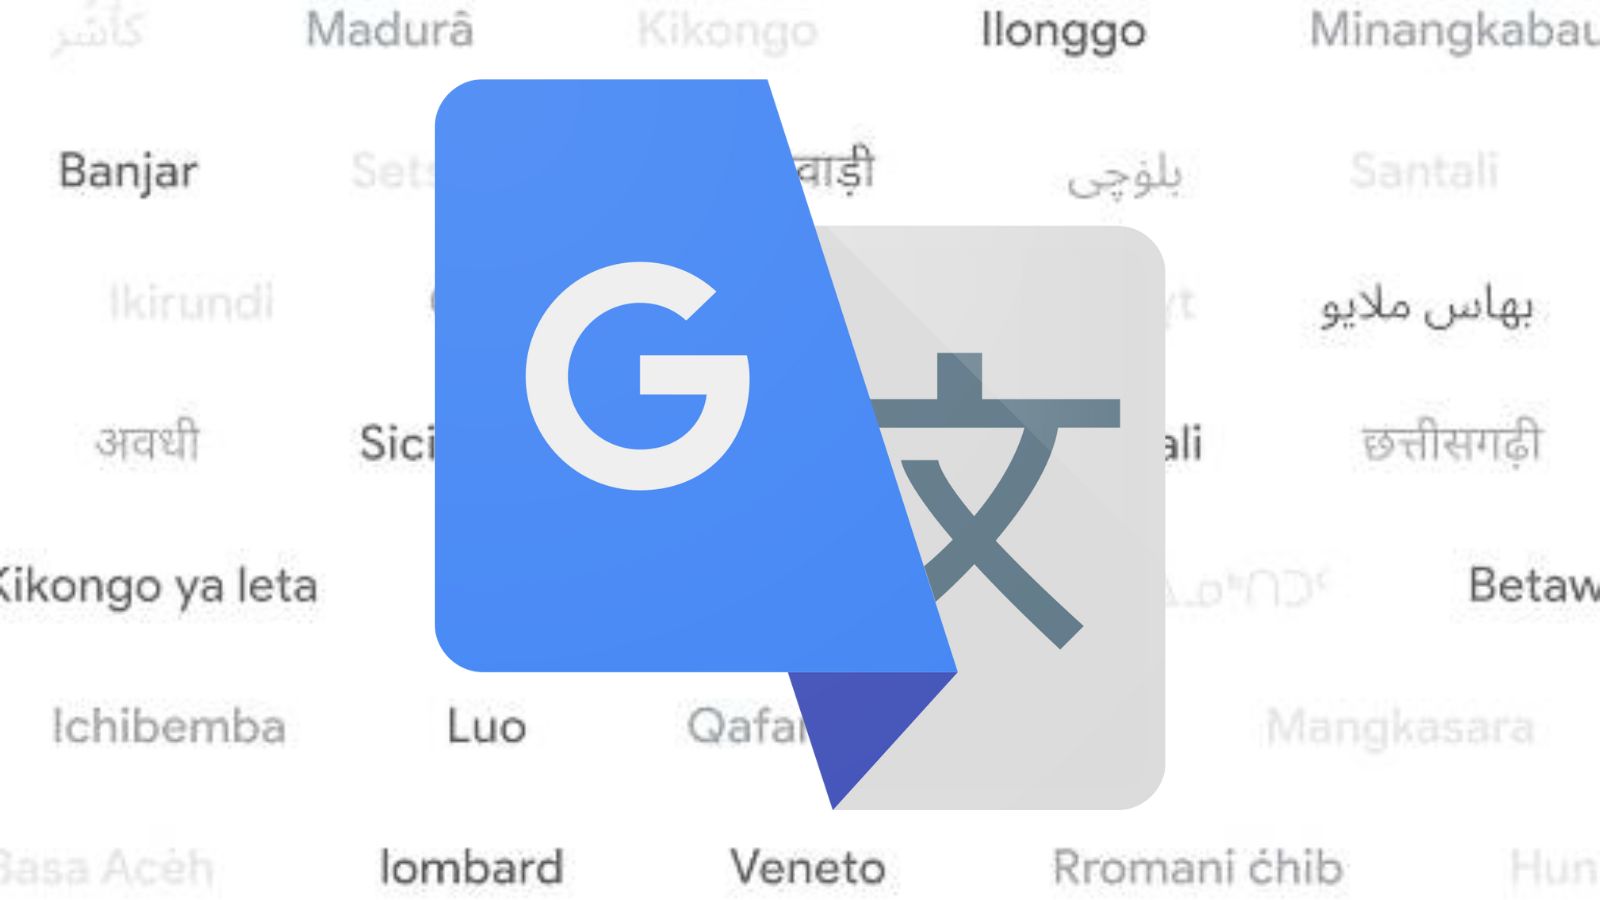 Google Translate expands to 110 new languages including Marwadi, Santali, and Tulu | Technology News - The Indian Express